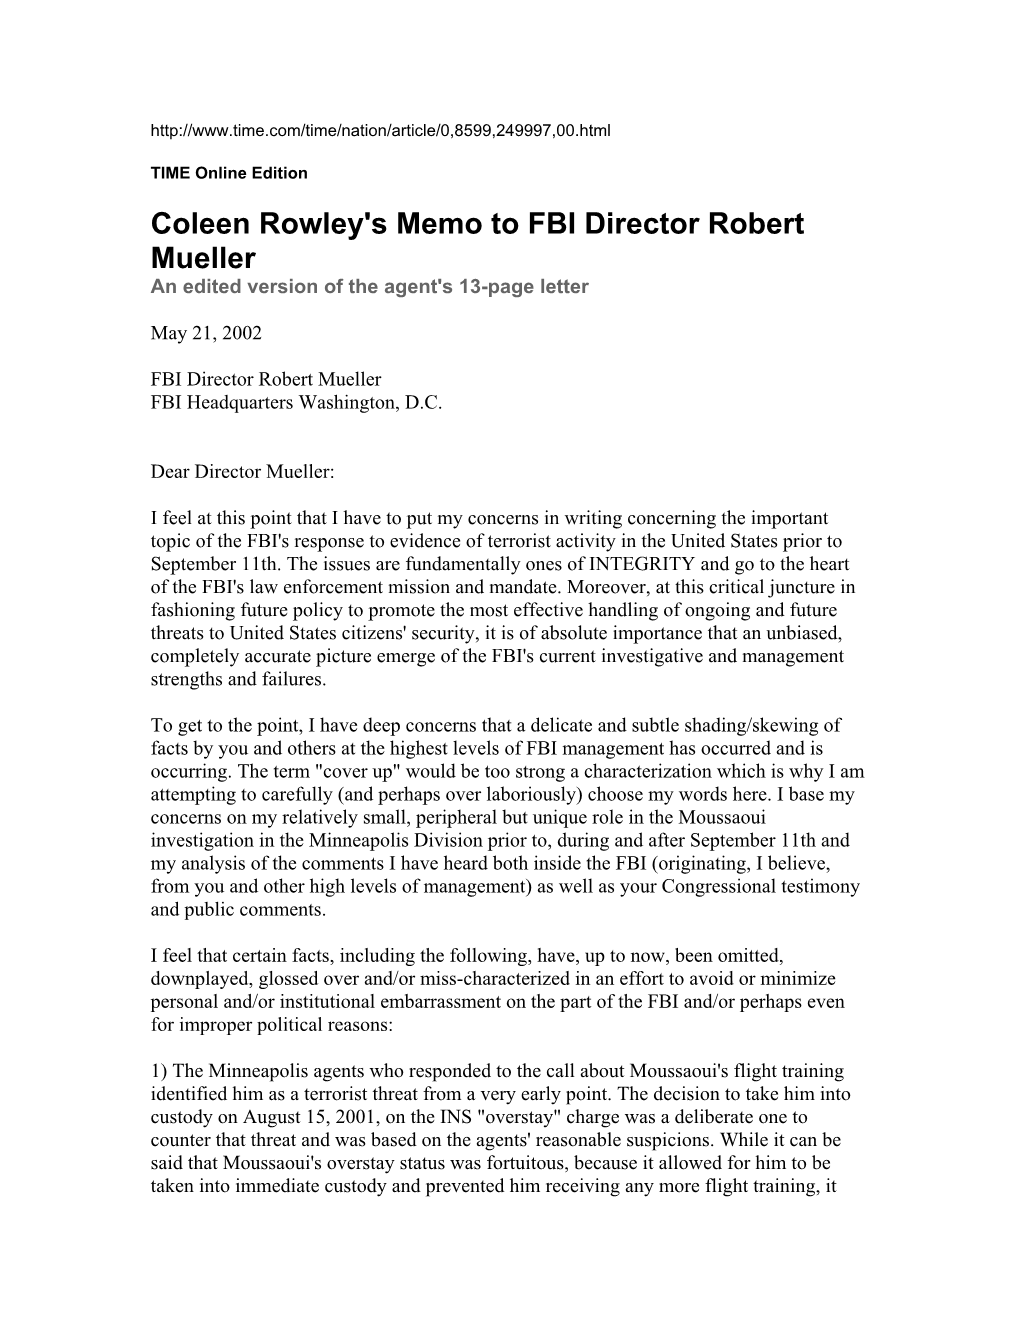 Coleen Rowley's Memo to FBI Director Robert Mueller an Edited Version of the Agent's 13-Page Letter